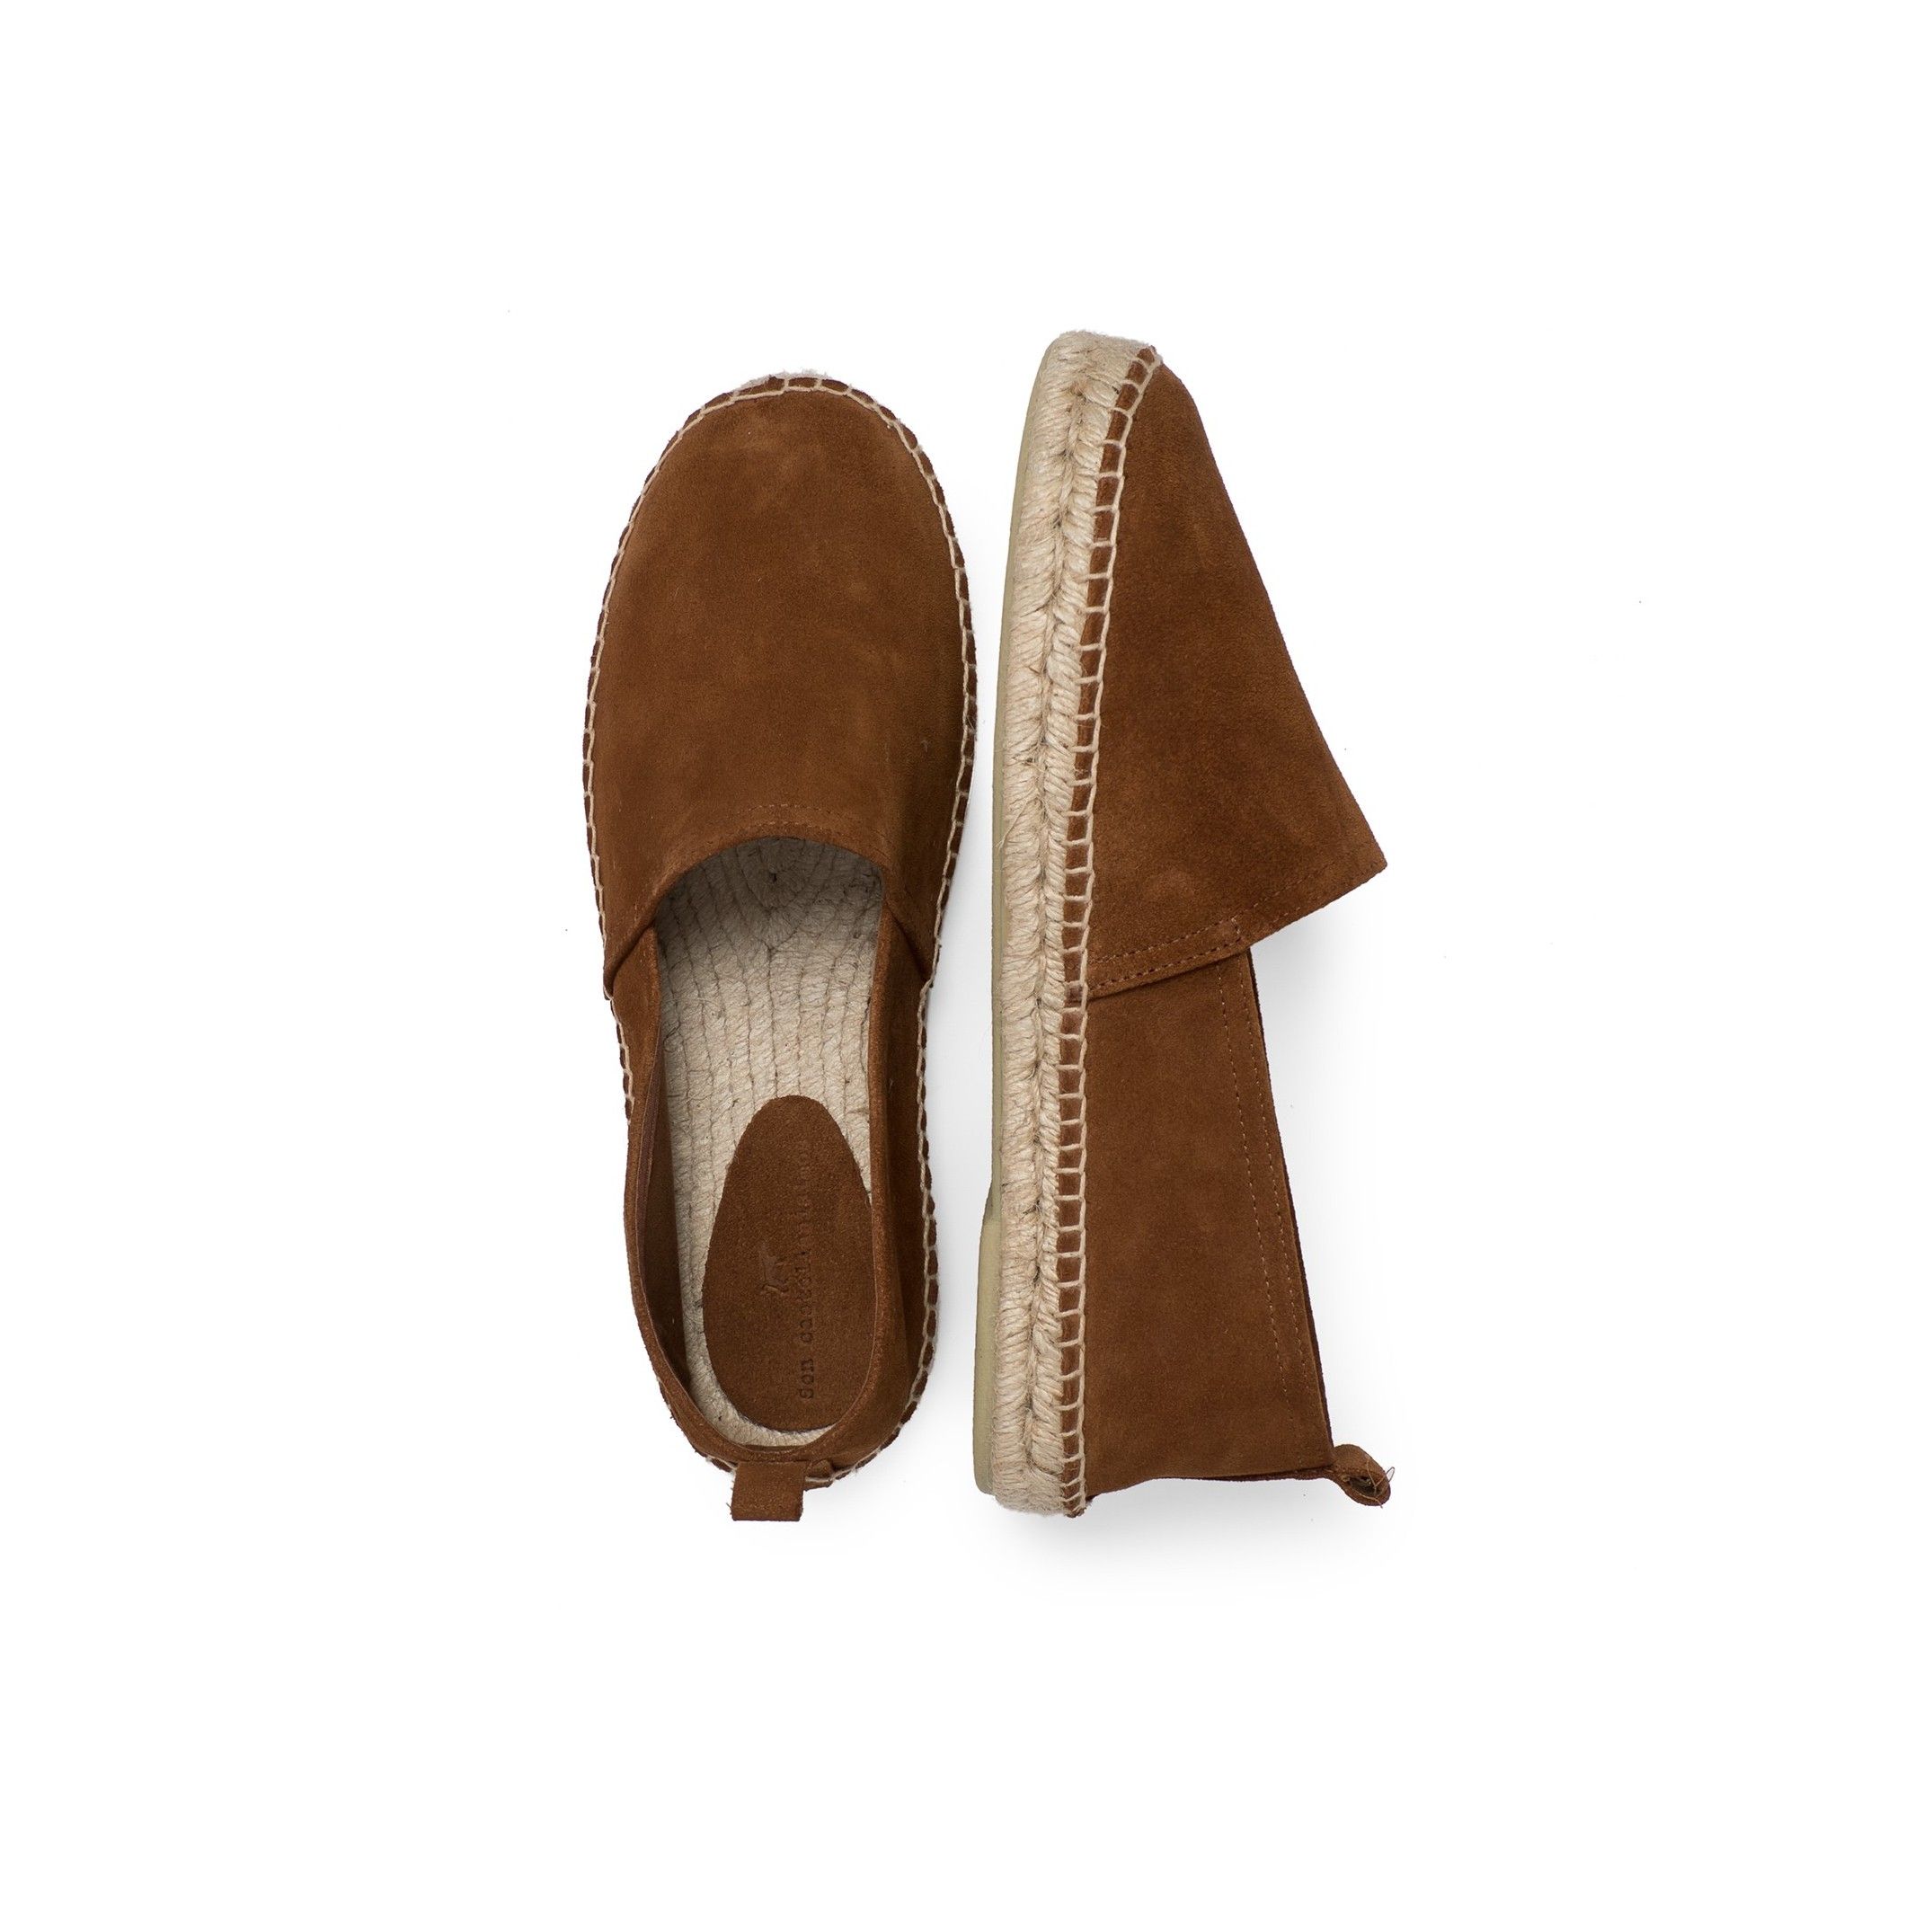 Flat espadrilles made of split leather, by Castellanisimos. Upper: cowhide leather. Inner lining and insole: 25% cowhide leather and 75% of textile. Sole material: synthetic and non-slip. Heel height: 2 cm. Designed and made of leather.